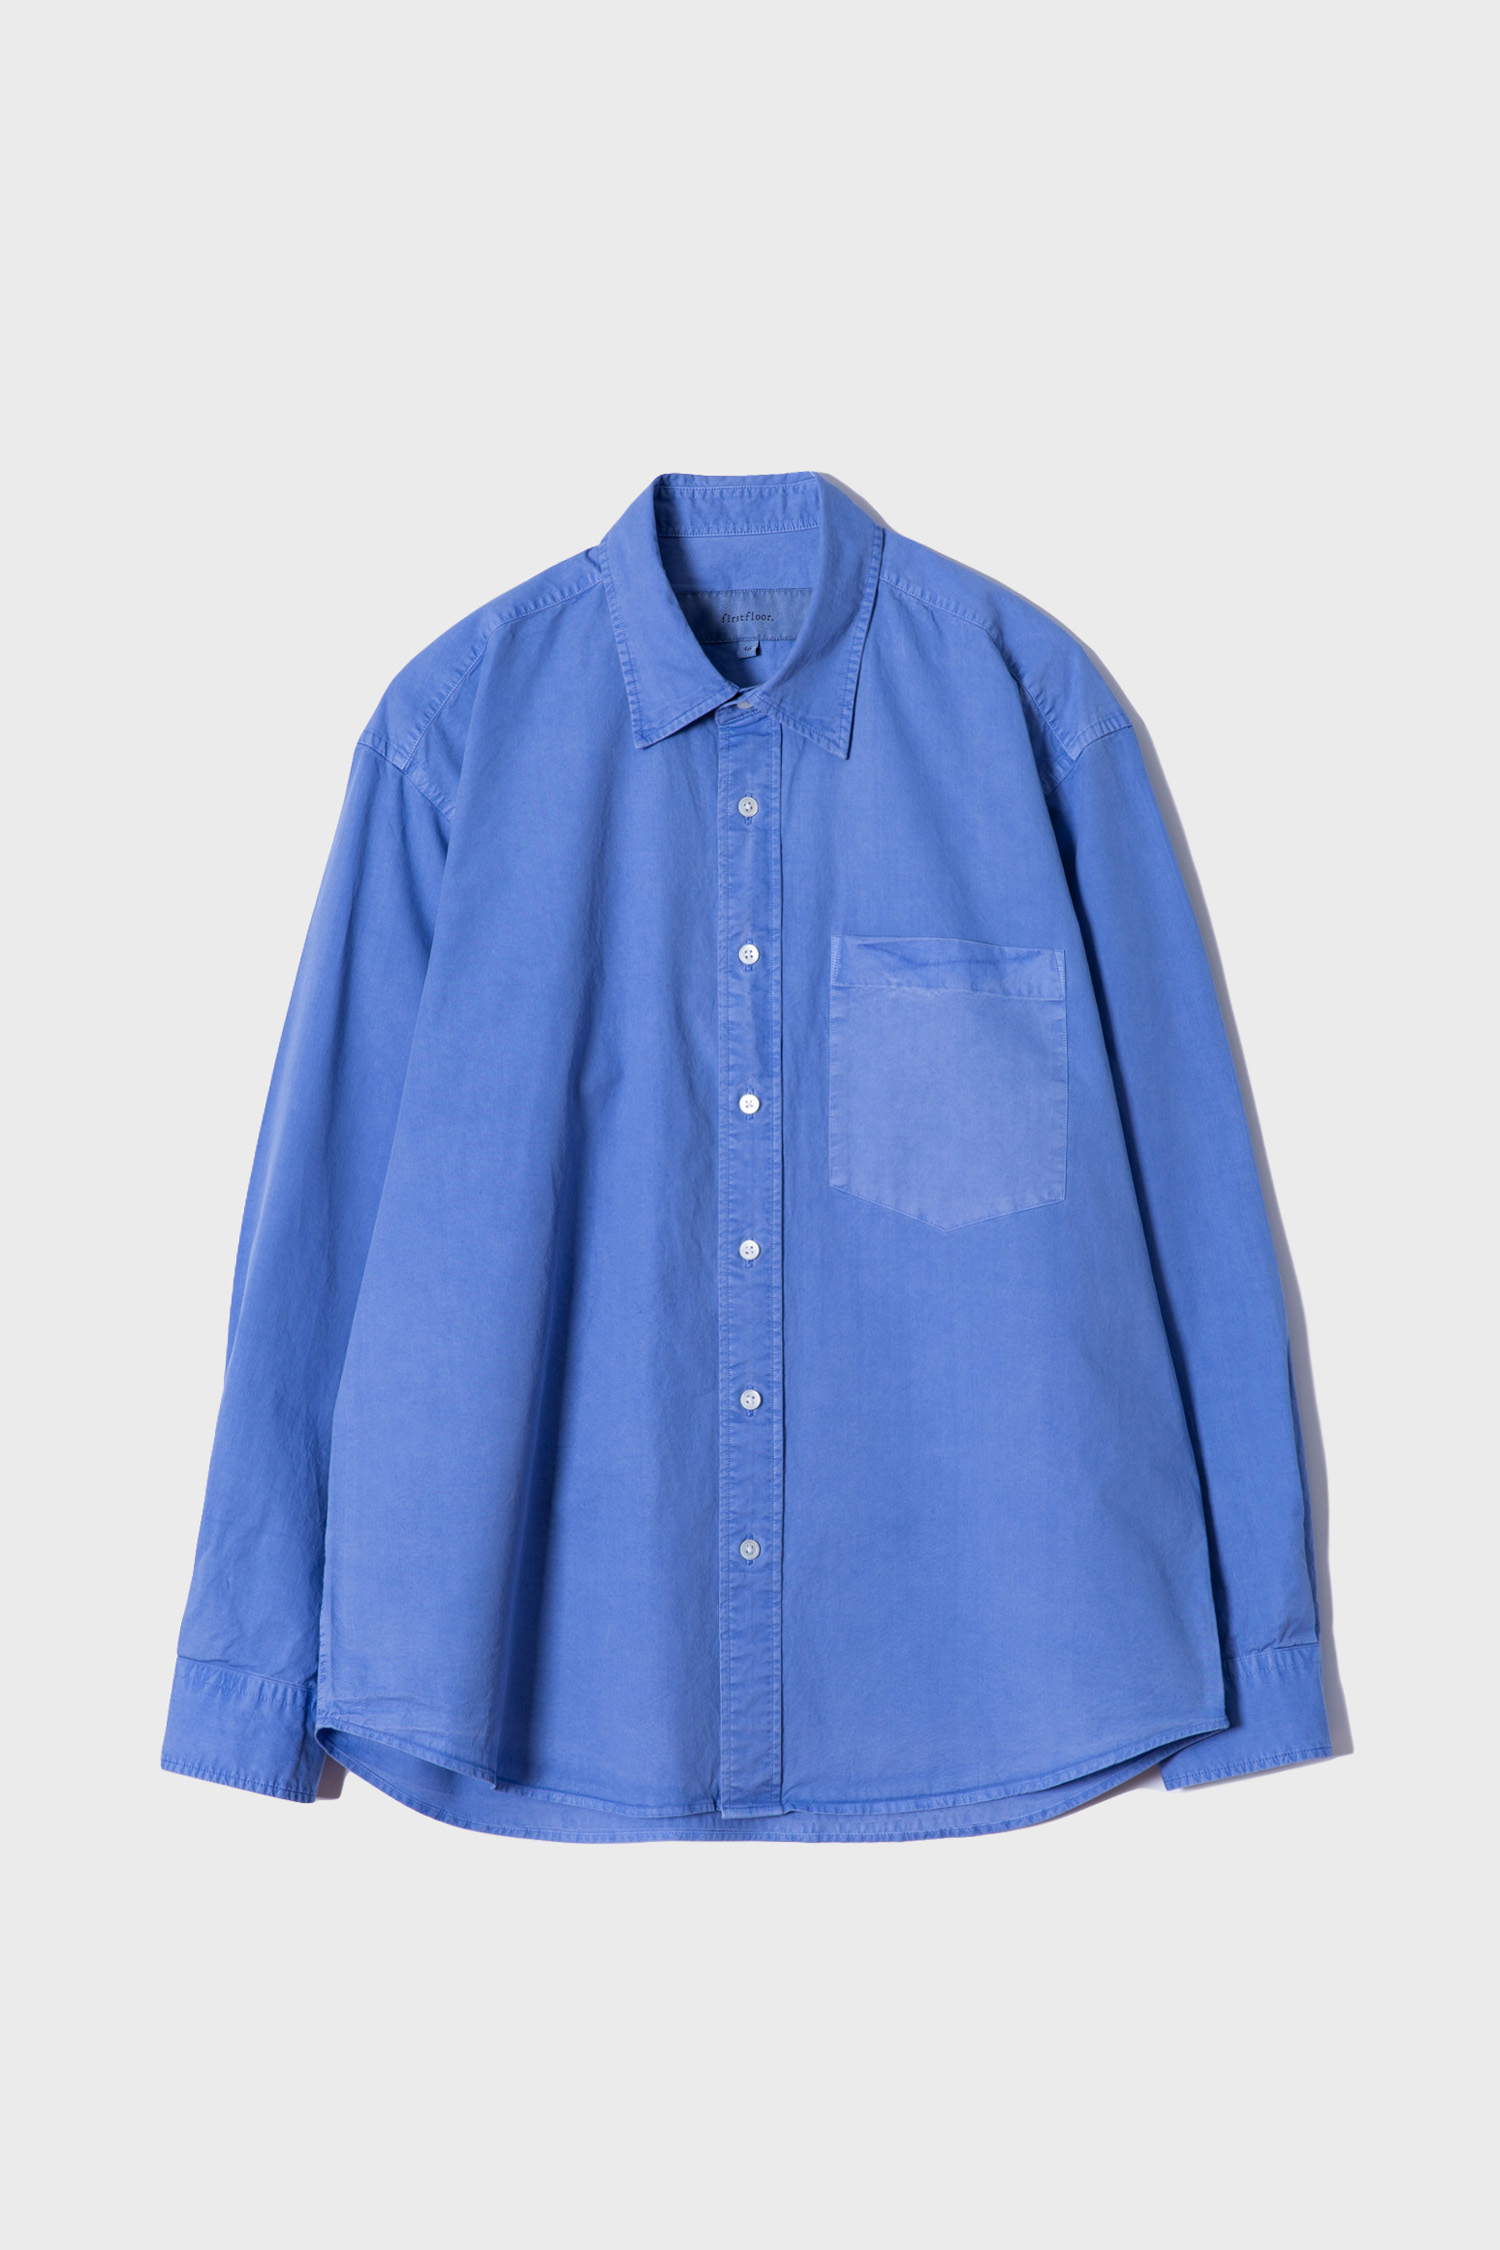 Dyed classic shirt (japanese processed, 3 colors)